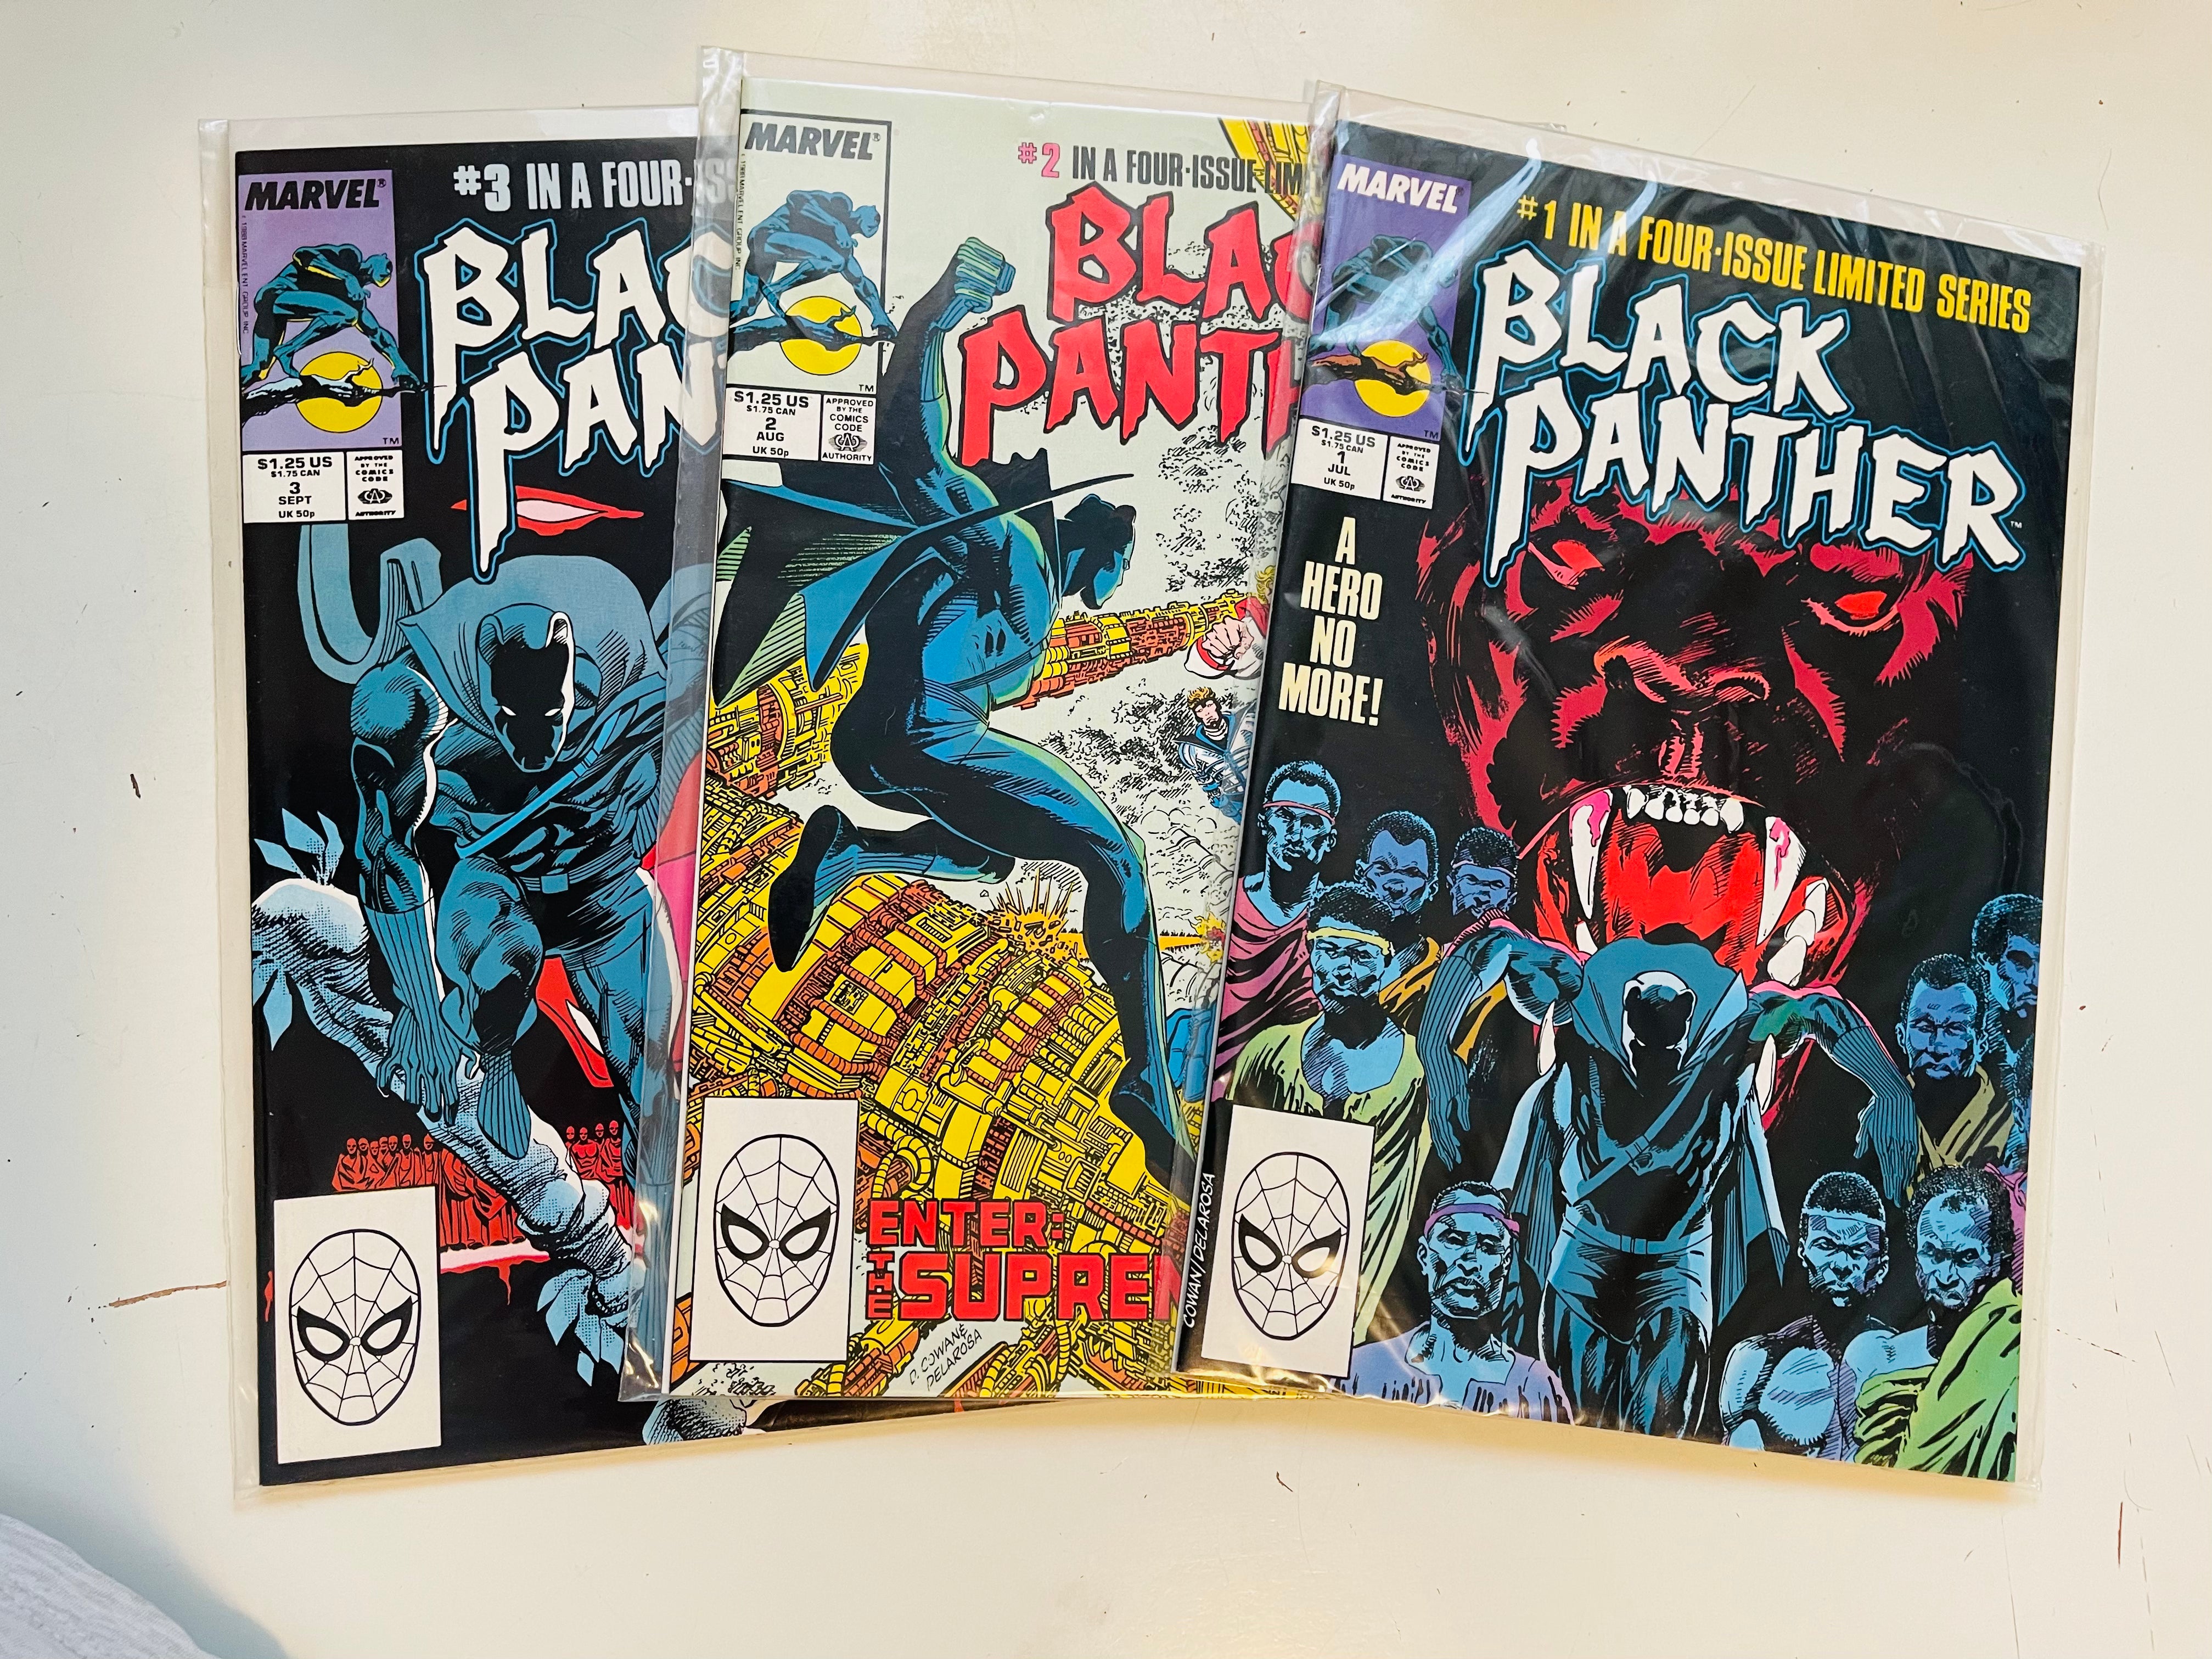 Black Panther limited series 1-3